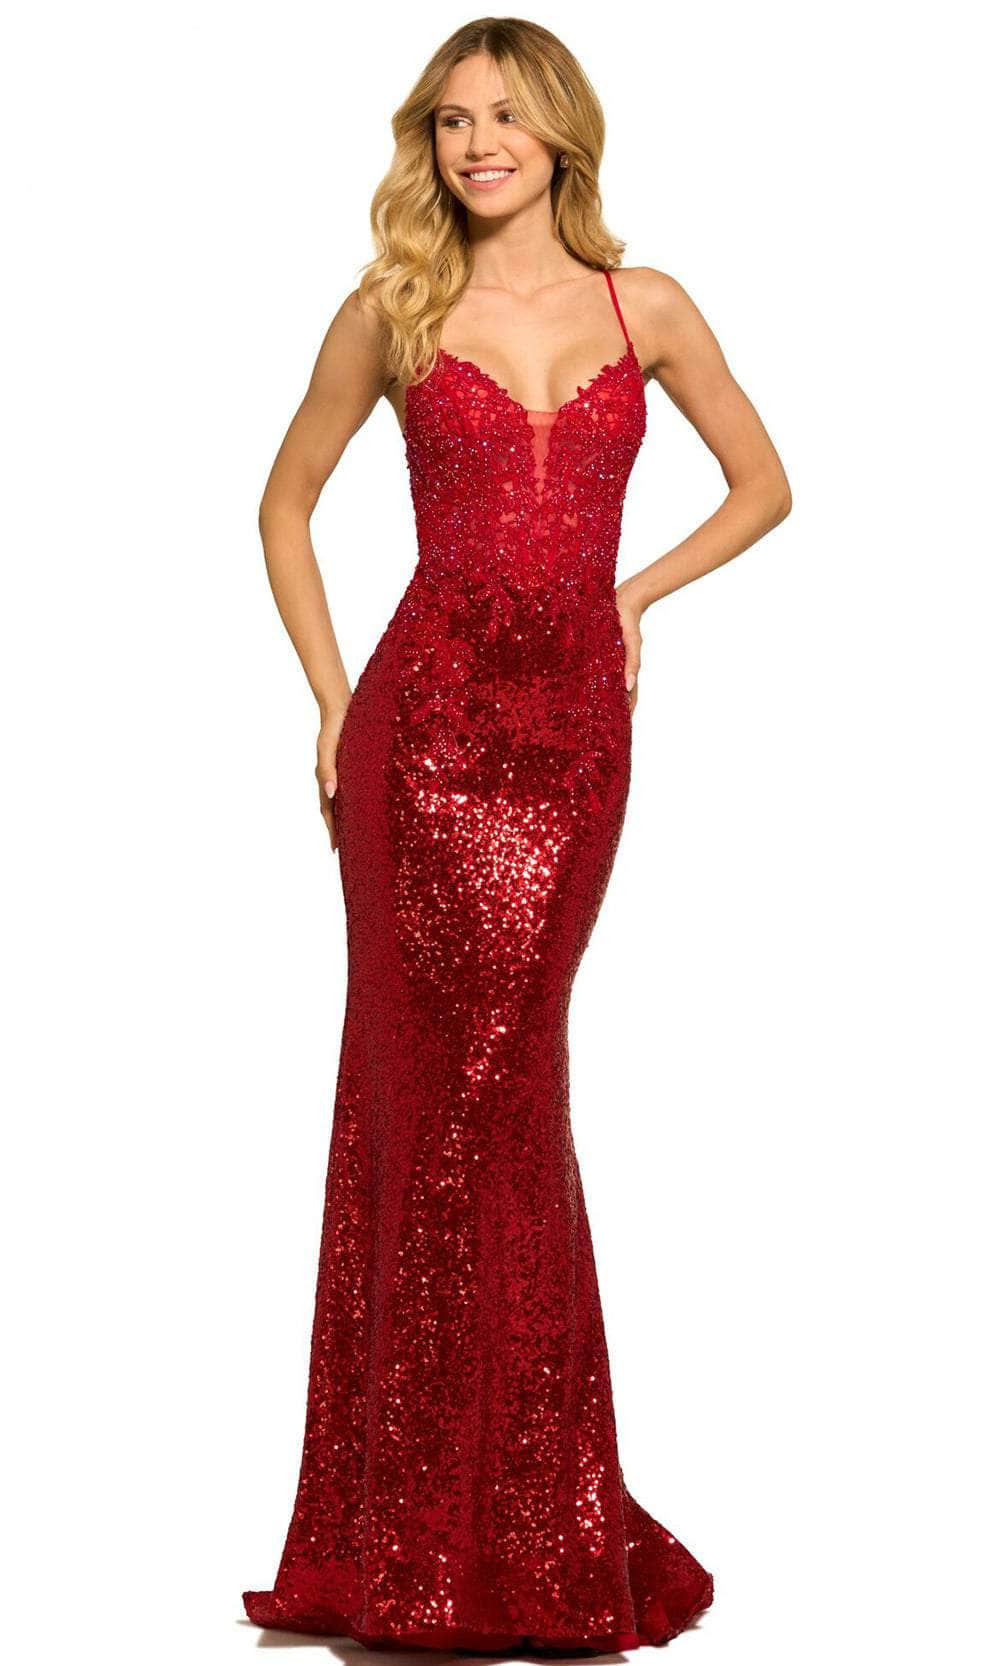 Image of Sherri Hill 55524 - Lace Bod Sequined Trumpet Evening Dress